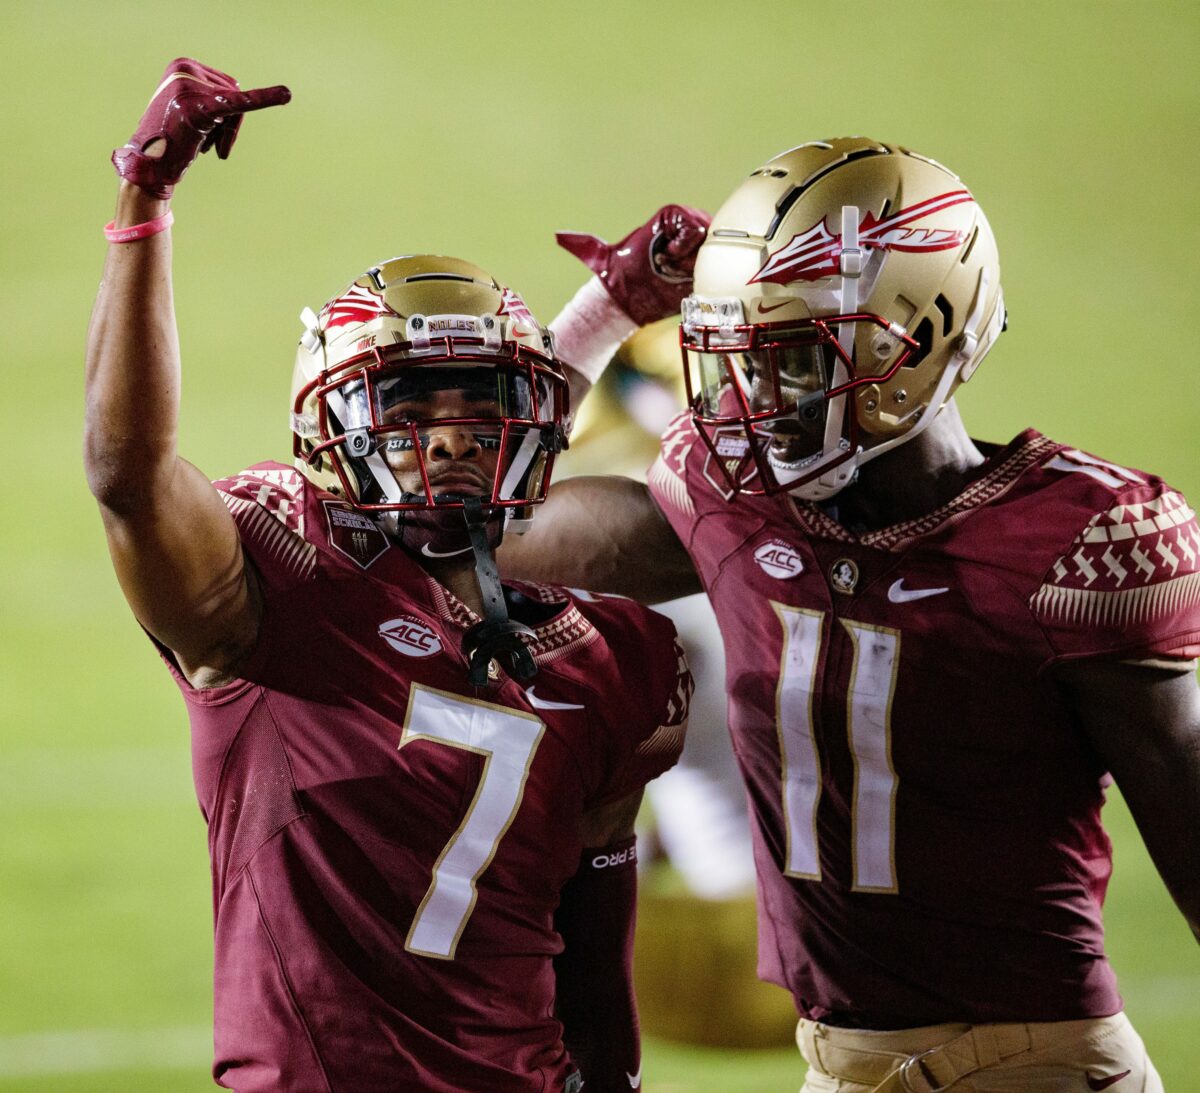 Notre Dame misses out to Florida State on defensive lineman transfer